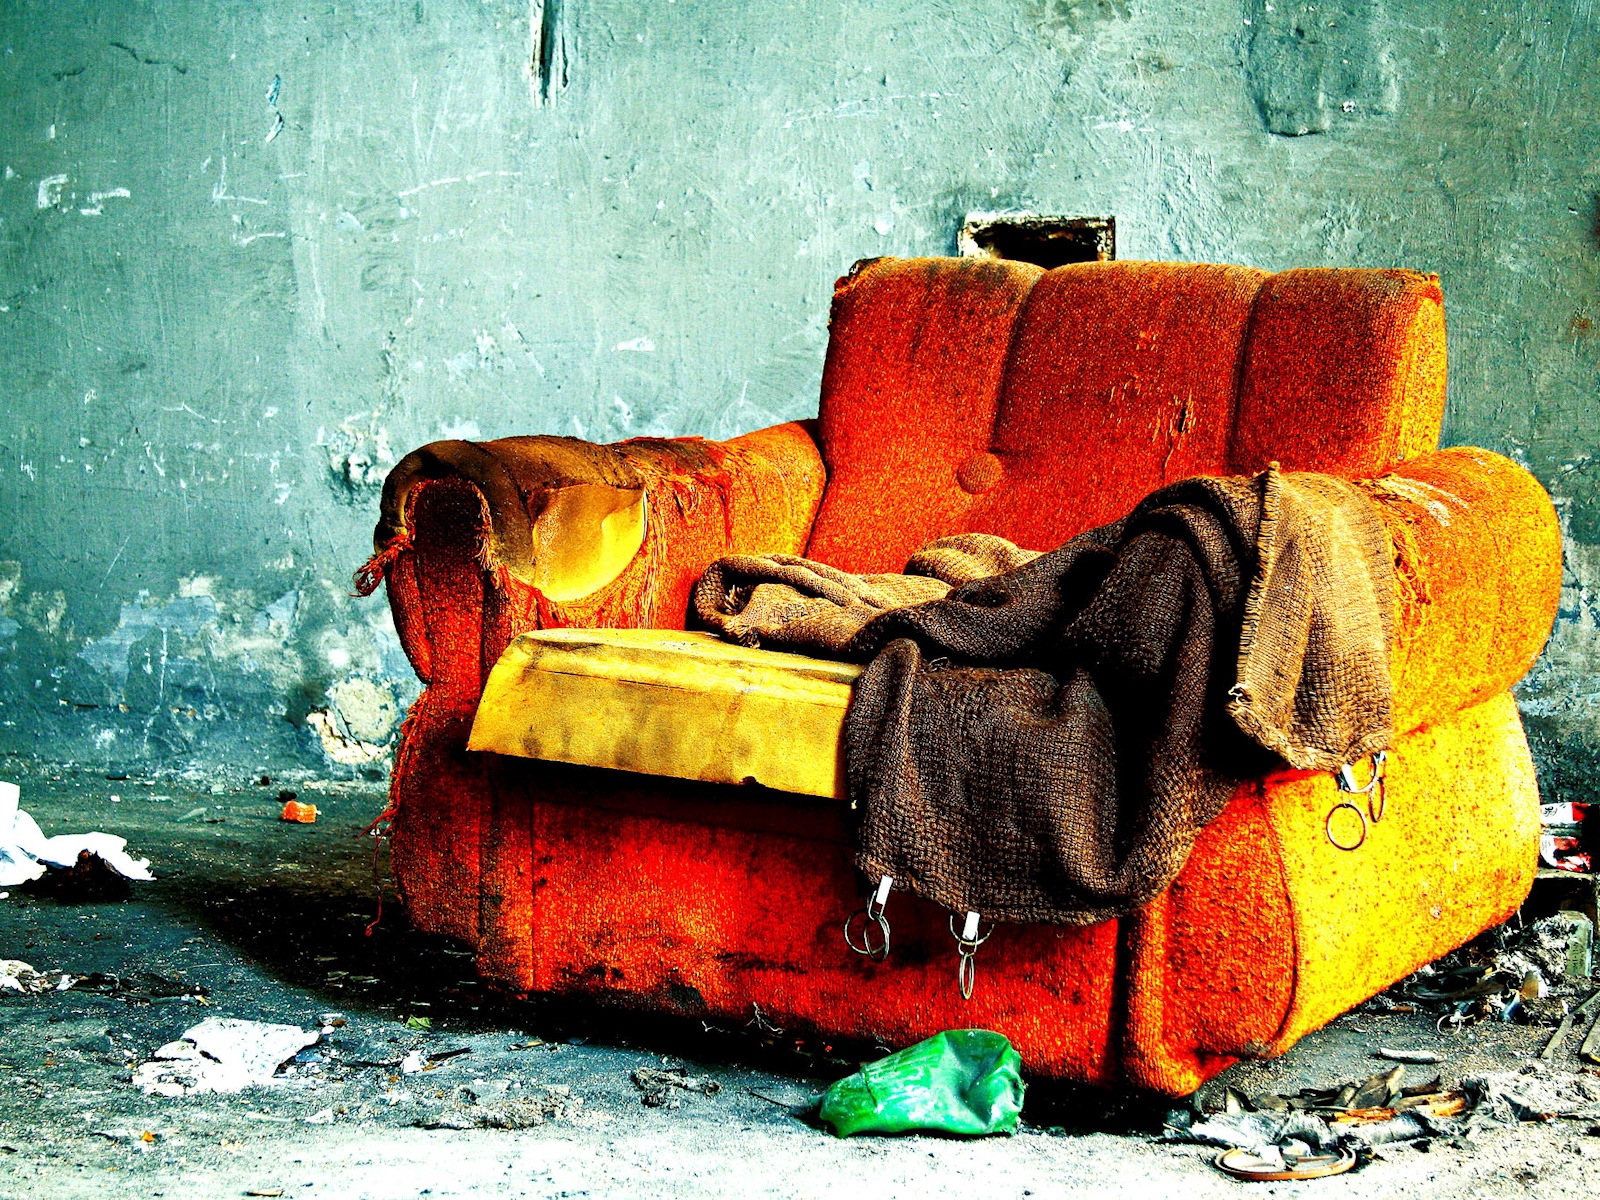 colourful, miscellanea, miscellaneous, old, colorful, armchair, ancient, ragged Full HD